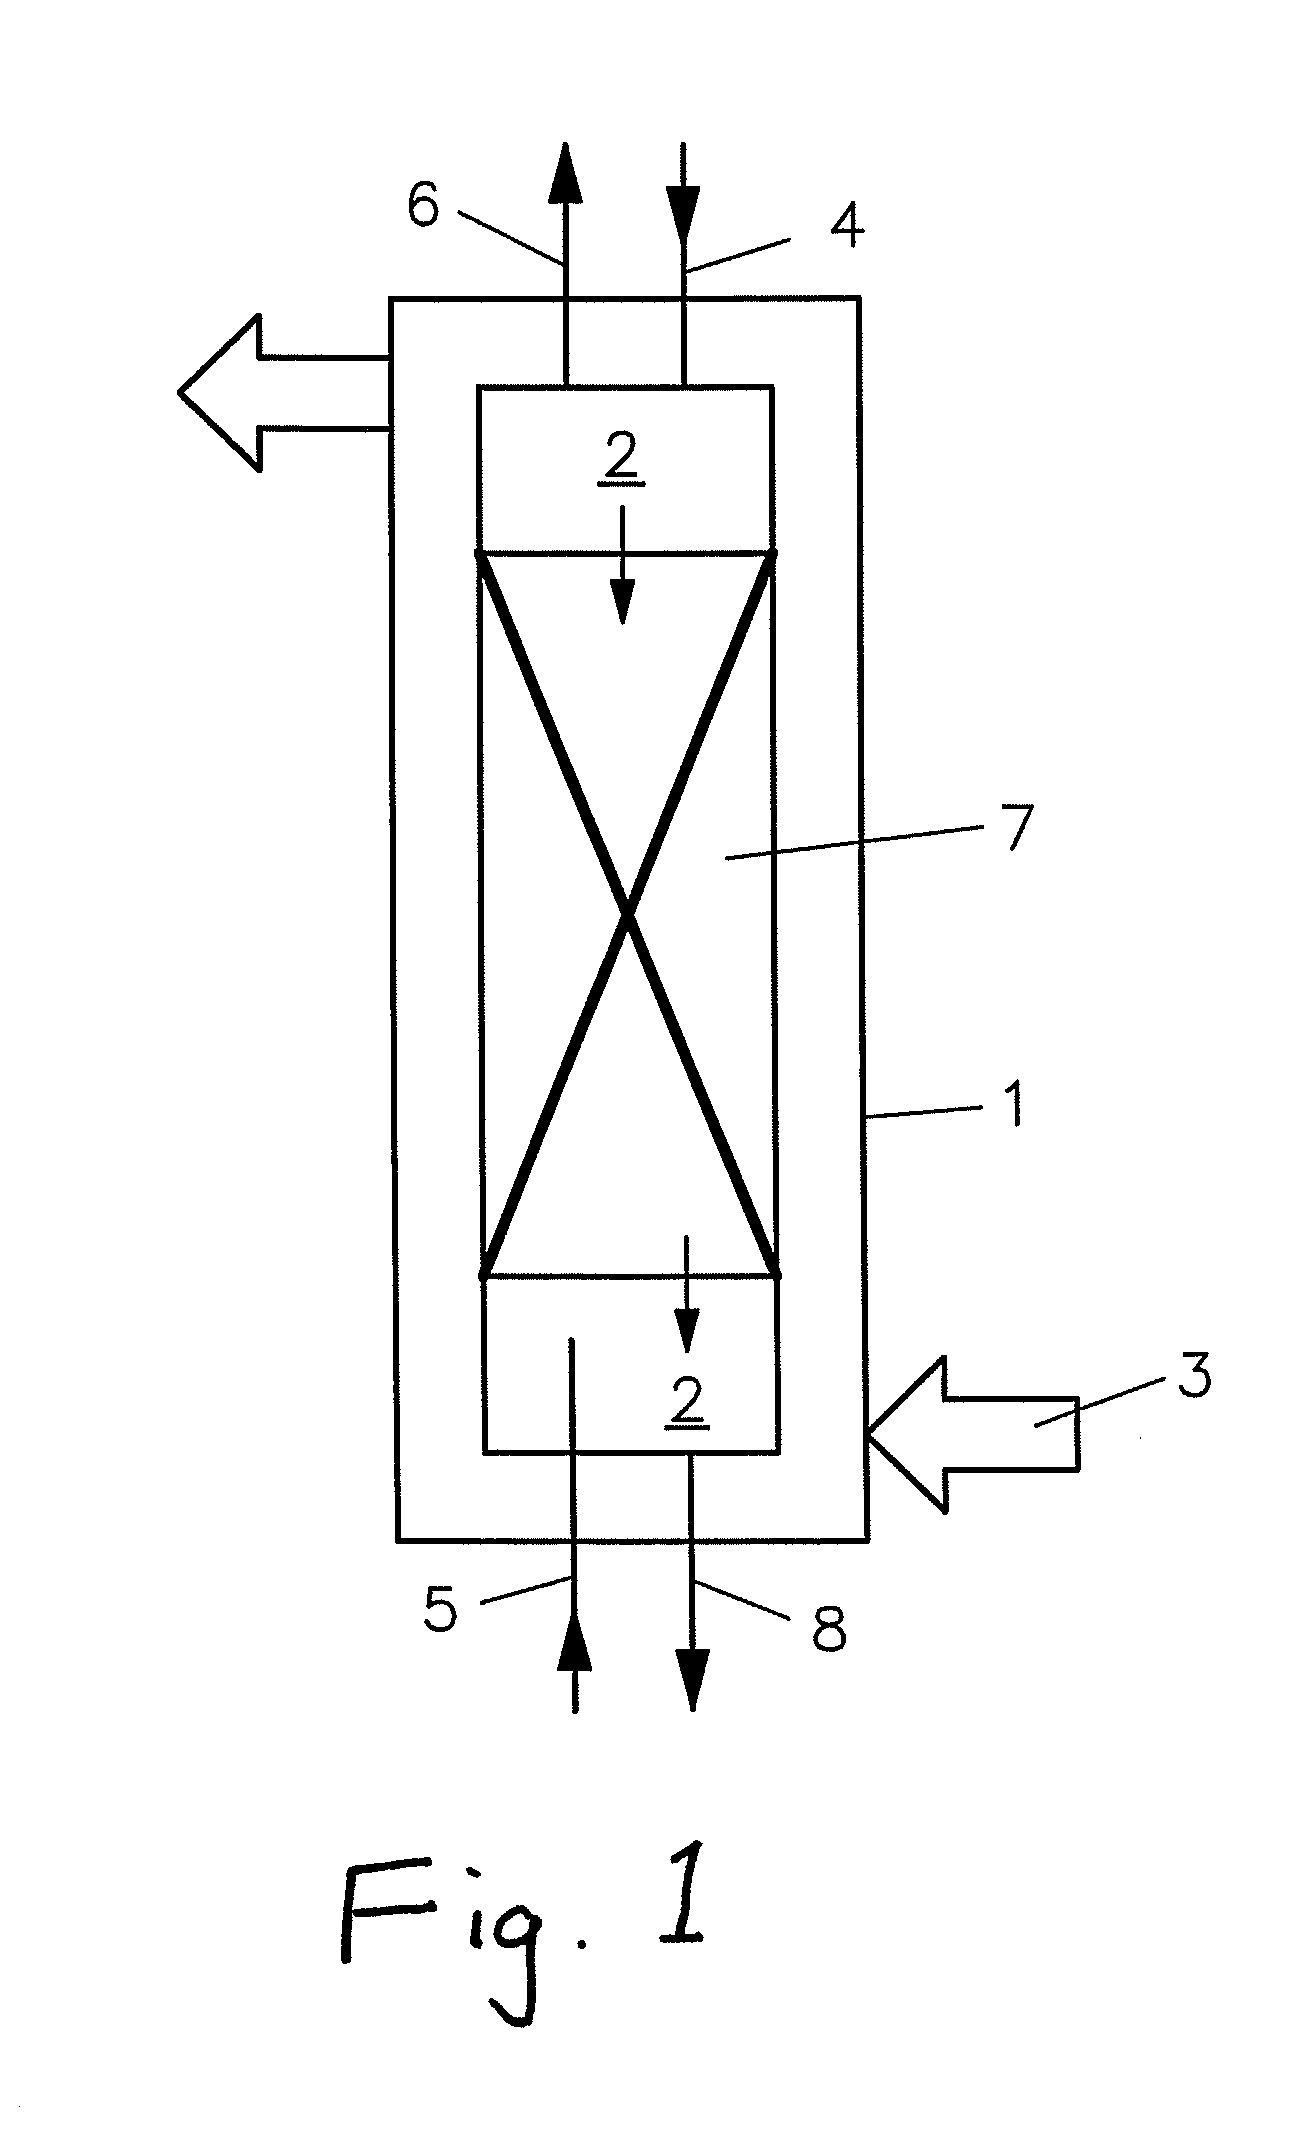 Process and device for converting biomass to gaseous products